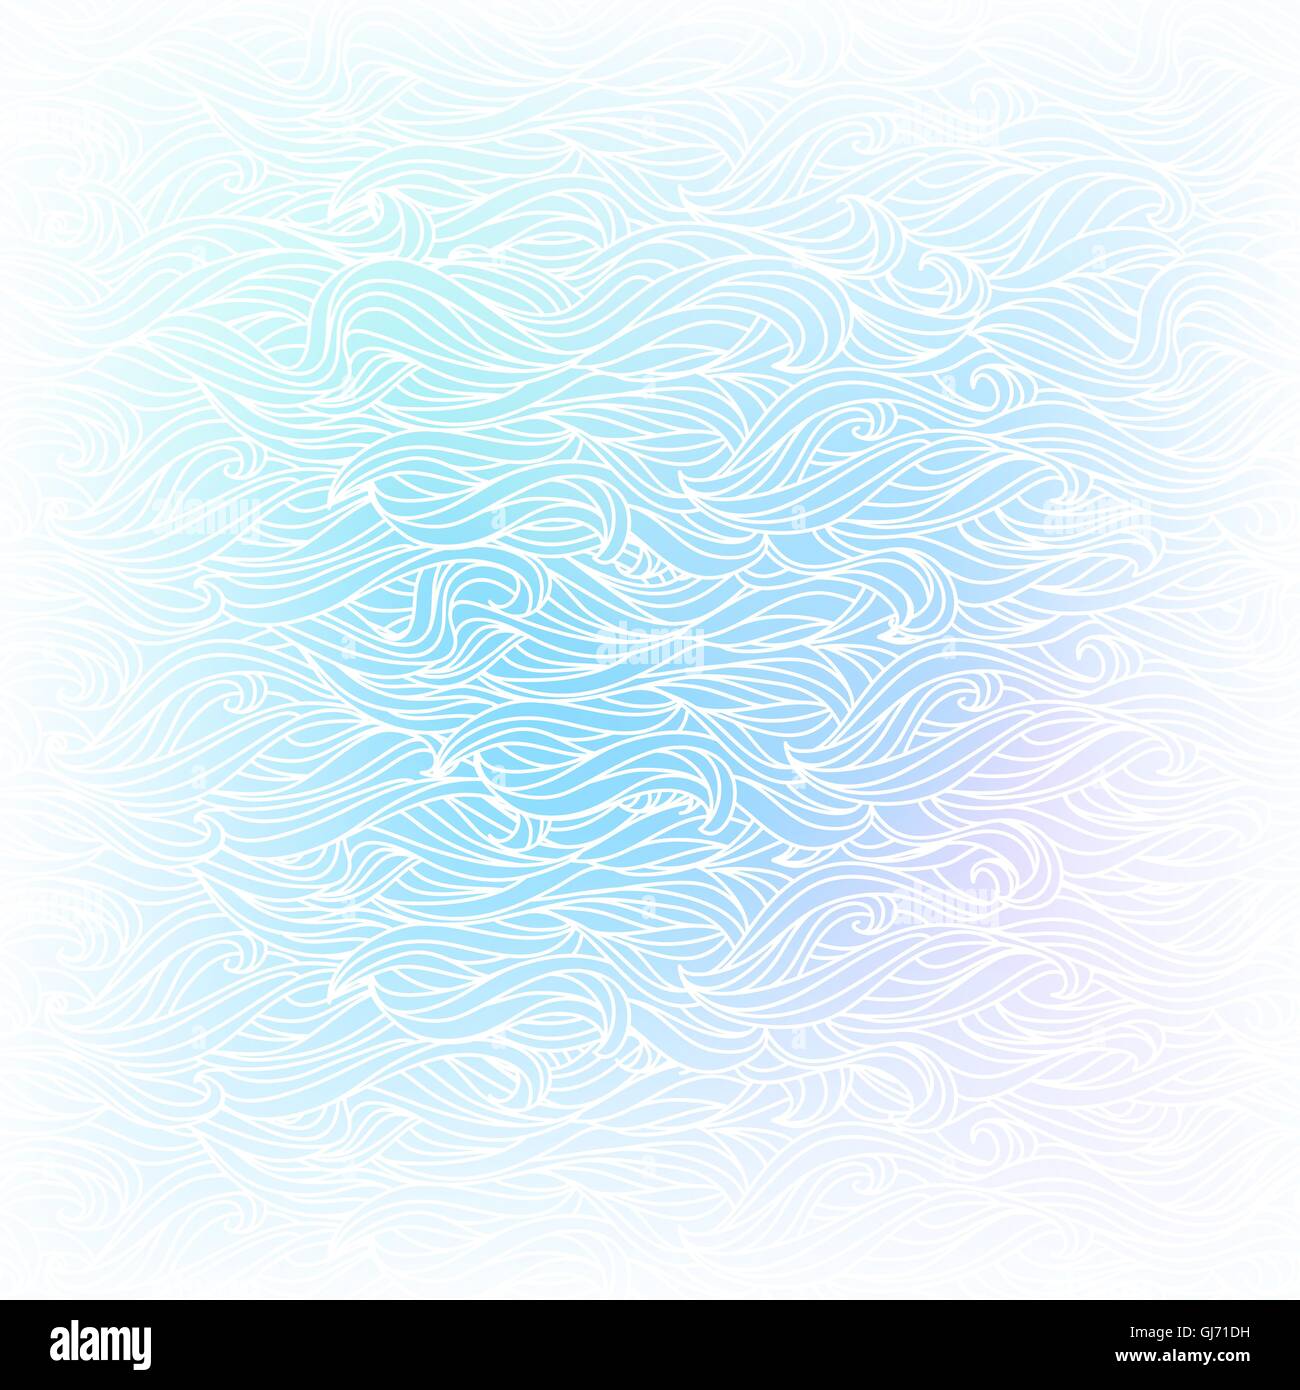 Seamless Abstract Vector Light Blue White Color Hand-drawn Stock Vector